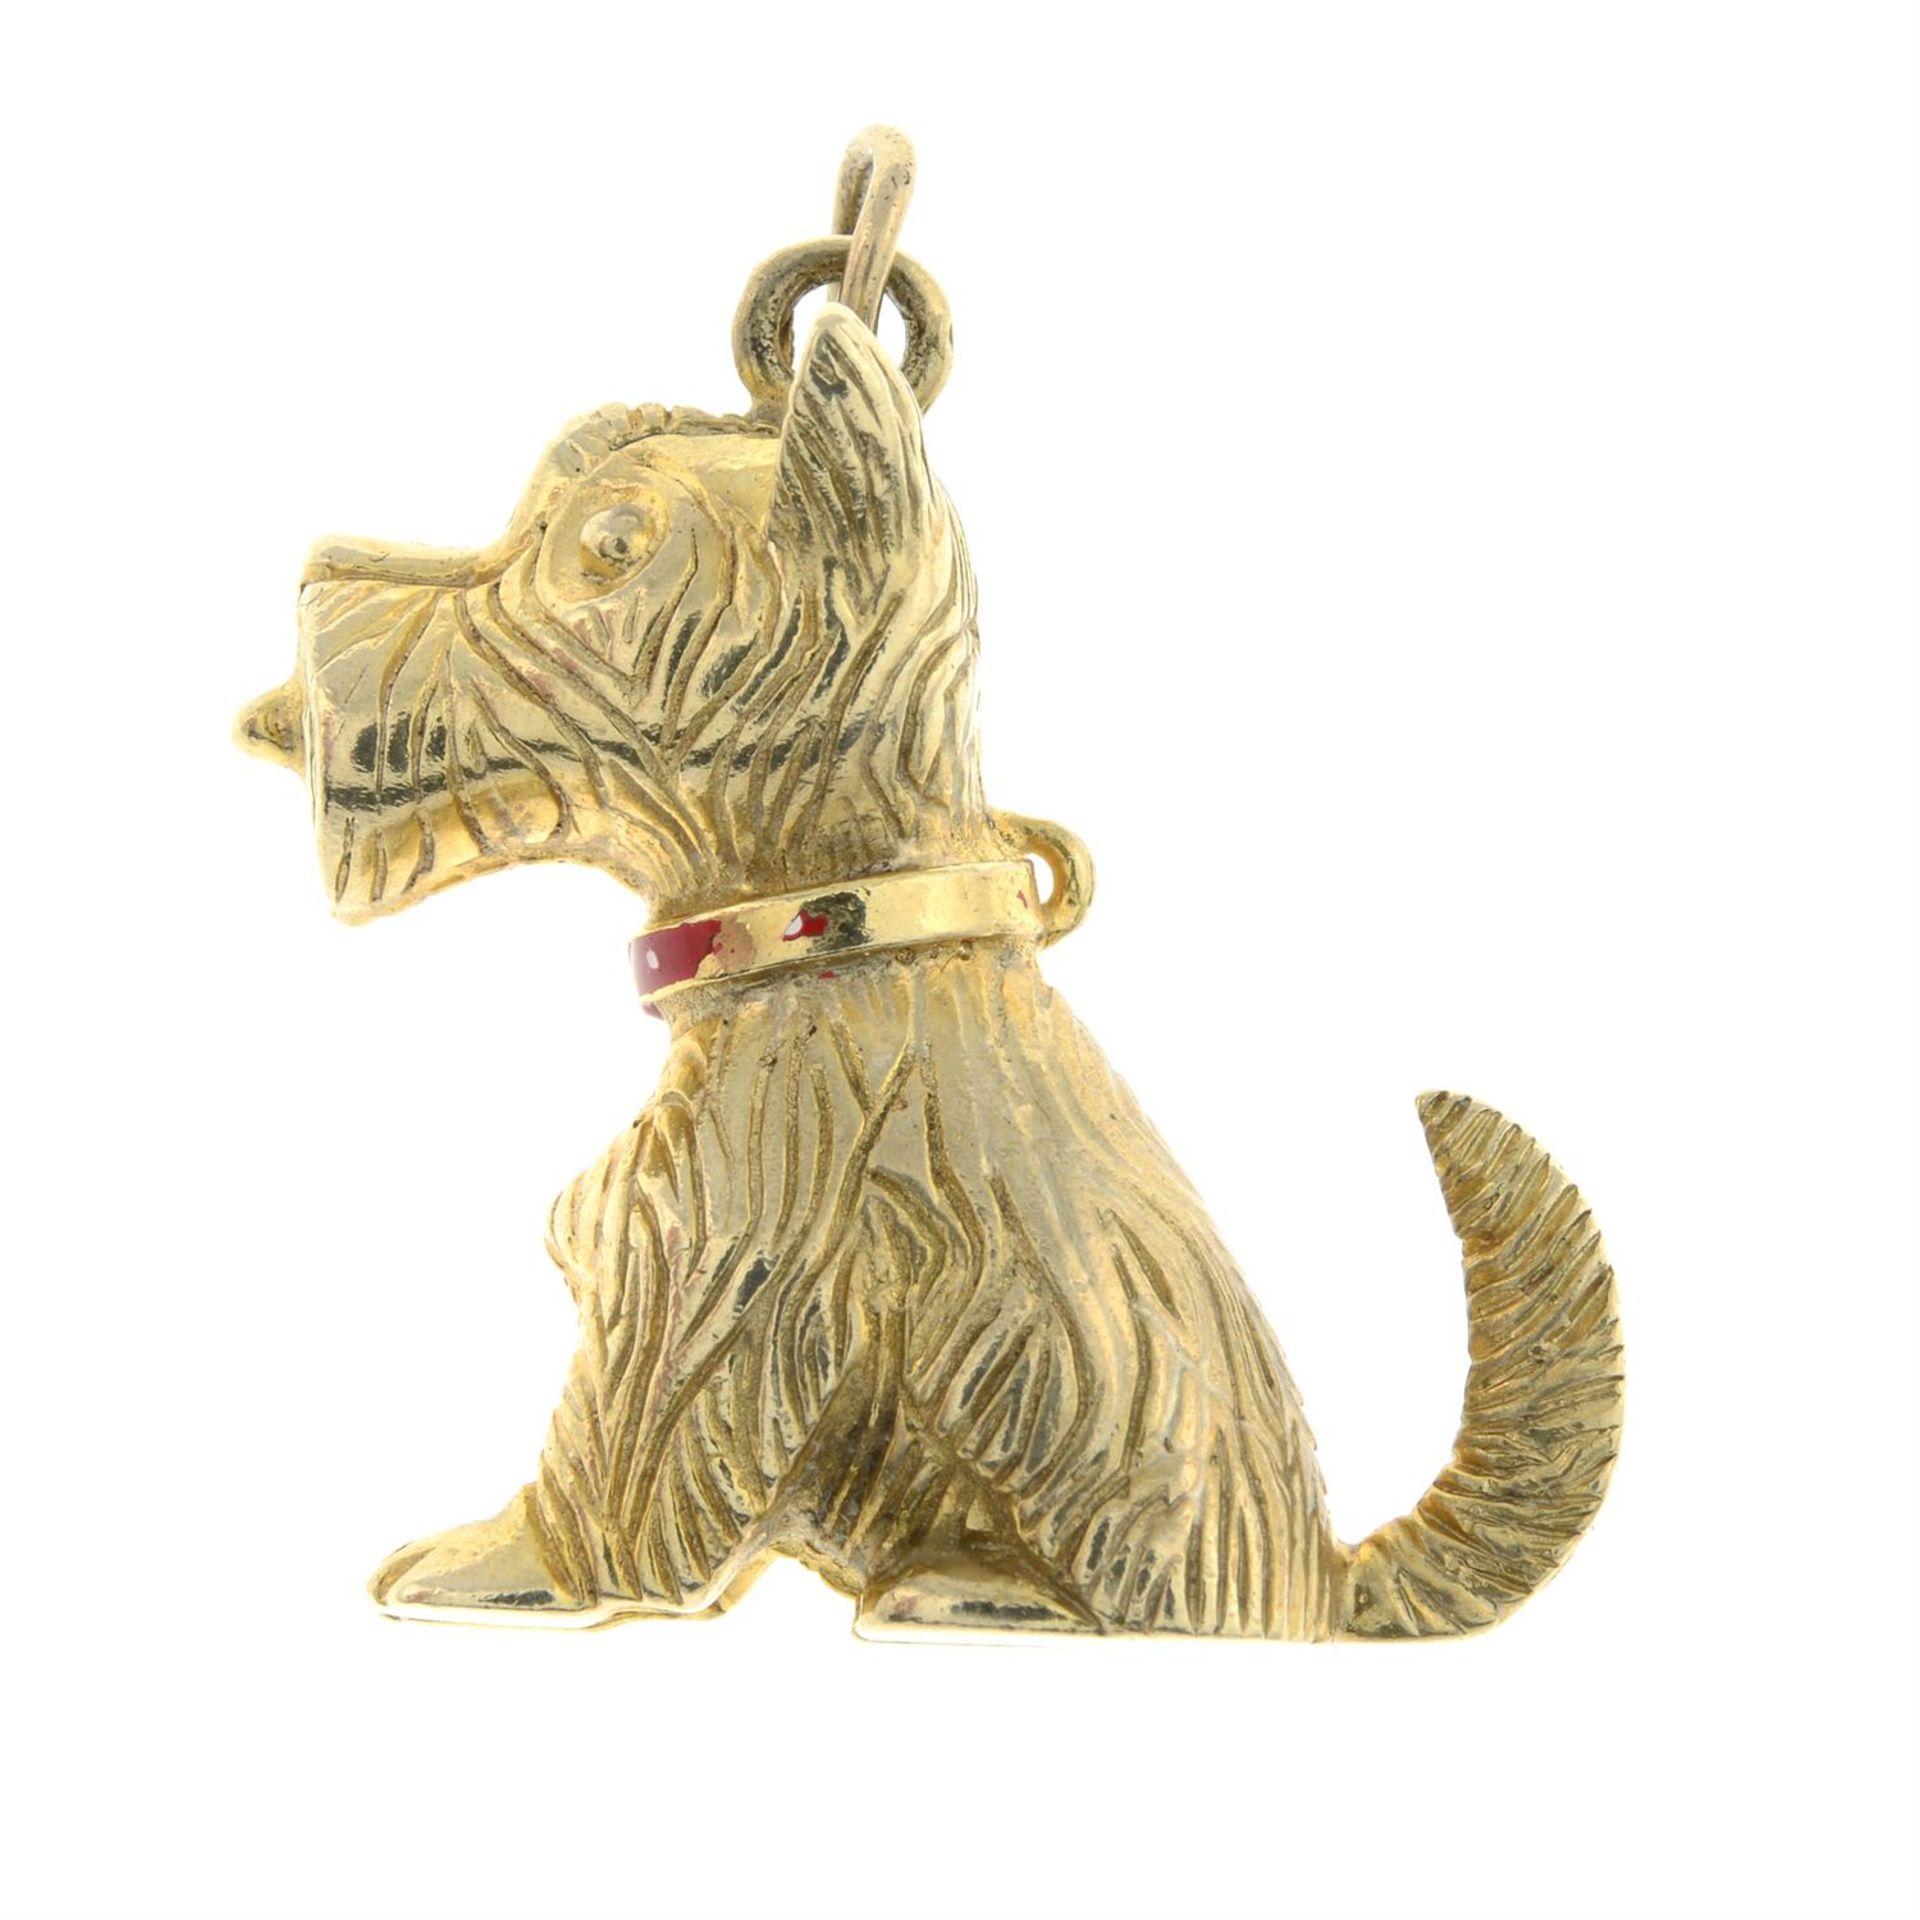 A 9ct gold textured dog charm, with red enamel collar and tongue.